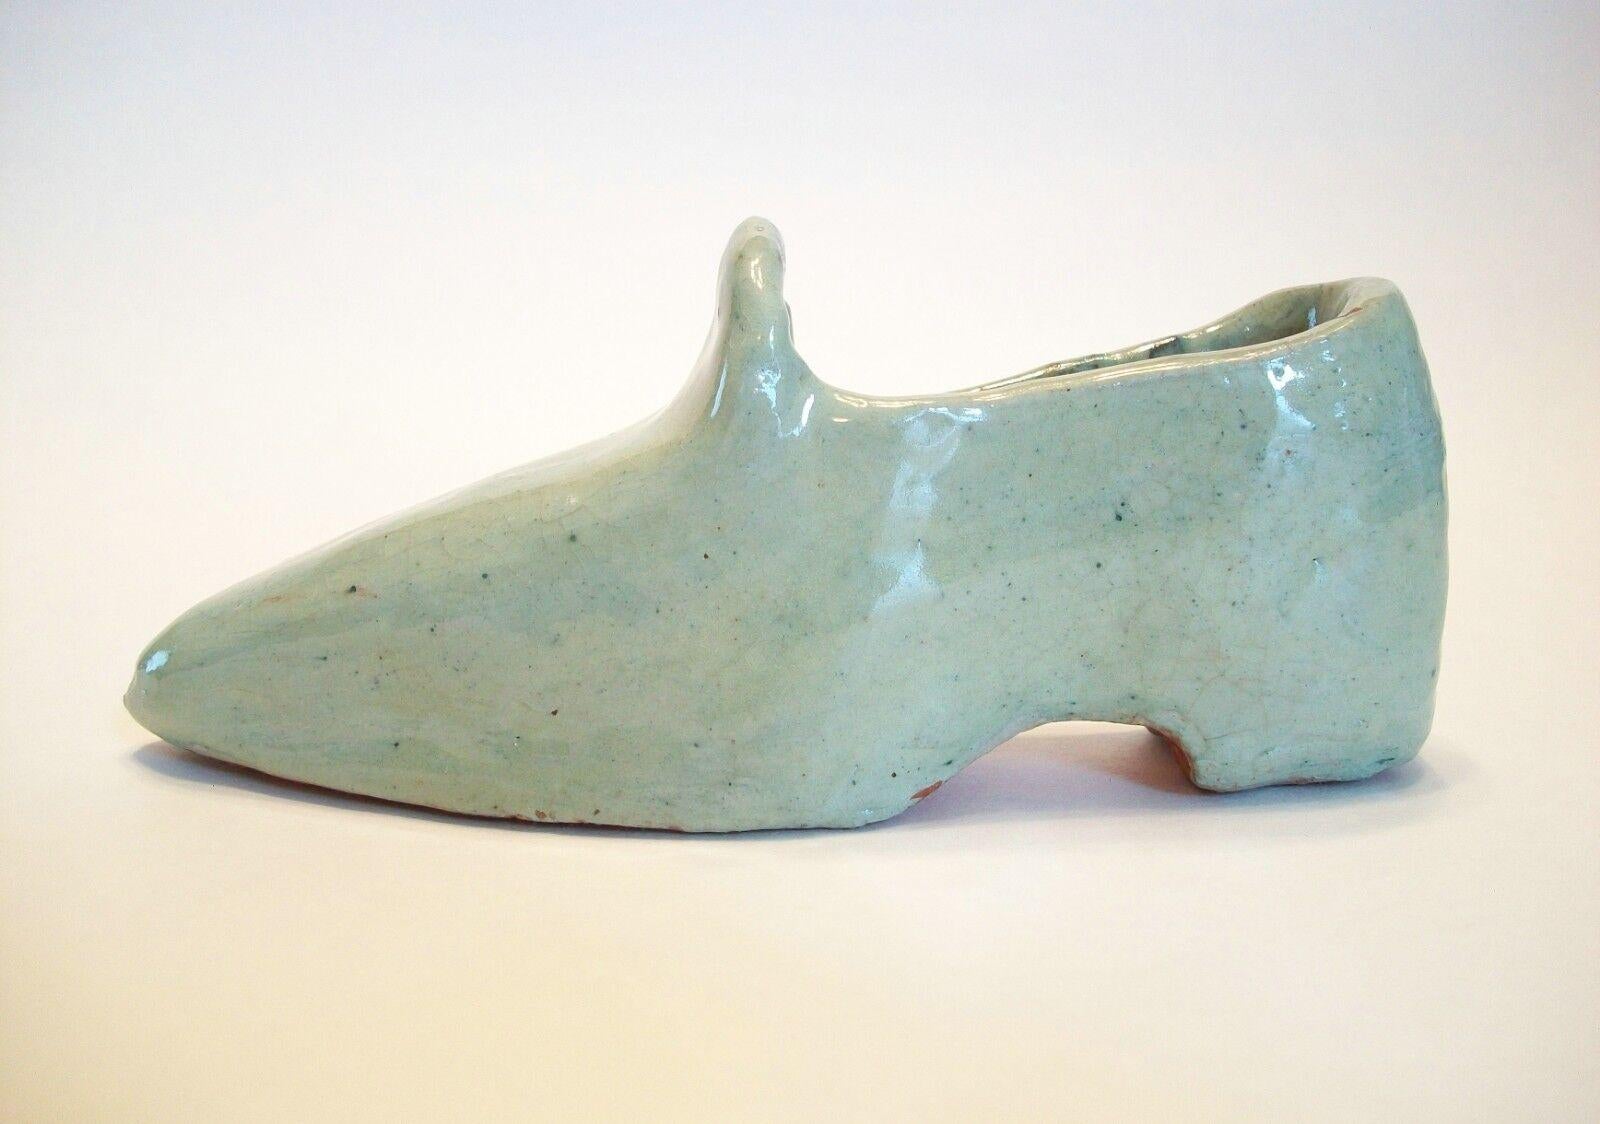 Vintage Folk Art Glazed Terracotta Shoe - Signed & Dated - U.S. - Circa 1966 In Good Condition For Sale In Chatham, ON